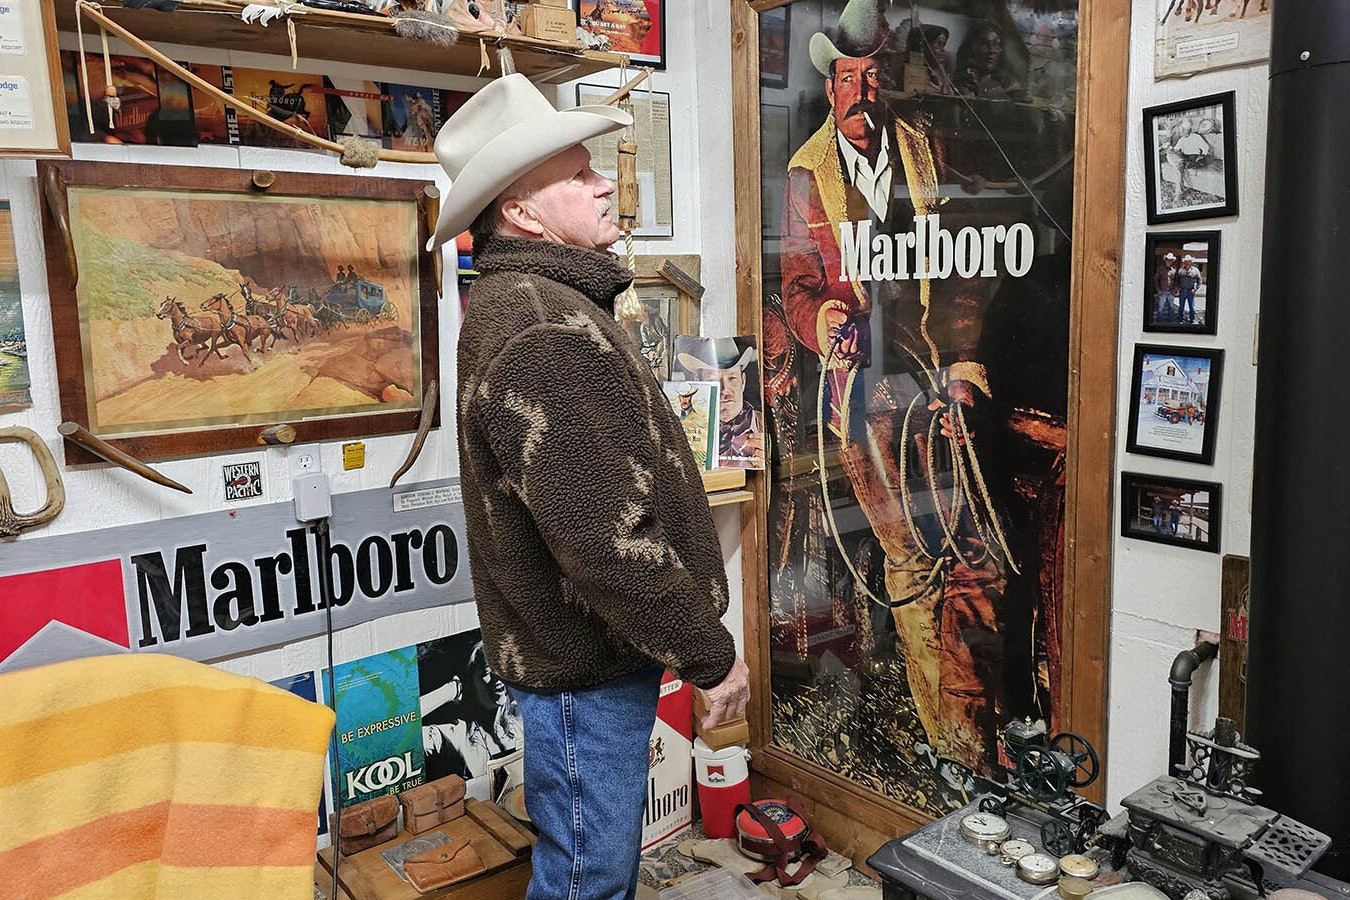 Dave Stephens has many photographs, but the one he likes best is the life-sized Marlboro Man portrait of his friend, Darrell Winfield.